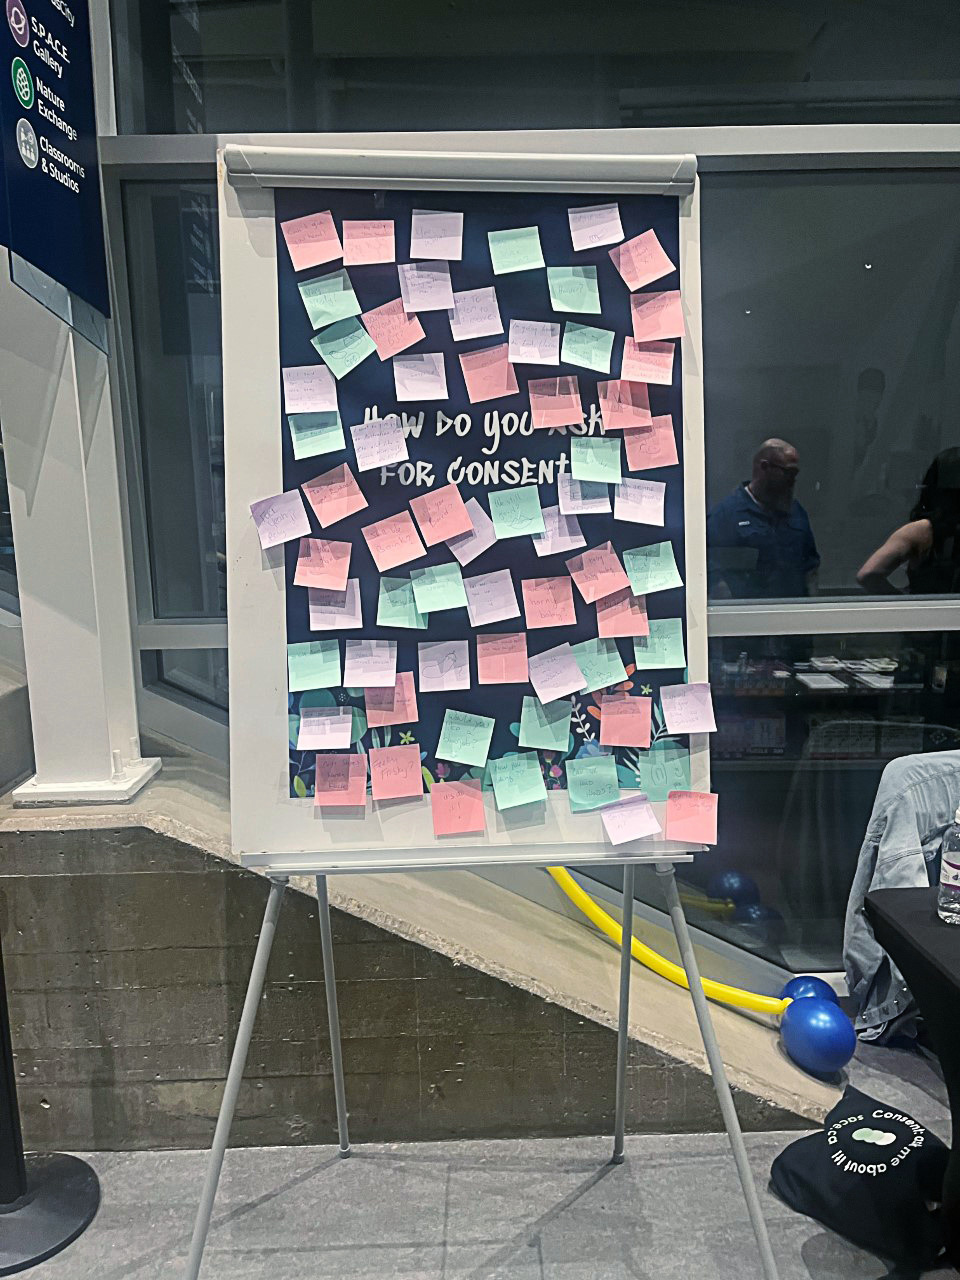 A giant board that invites the public to write down the ways they communicate consent, covered in sticky notes.